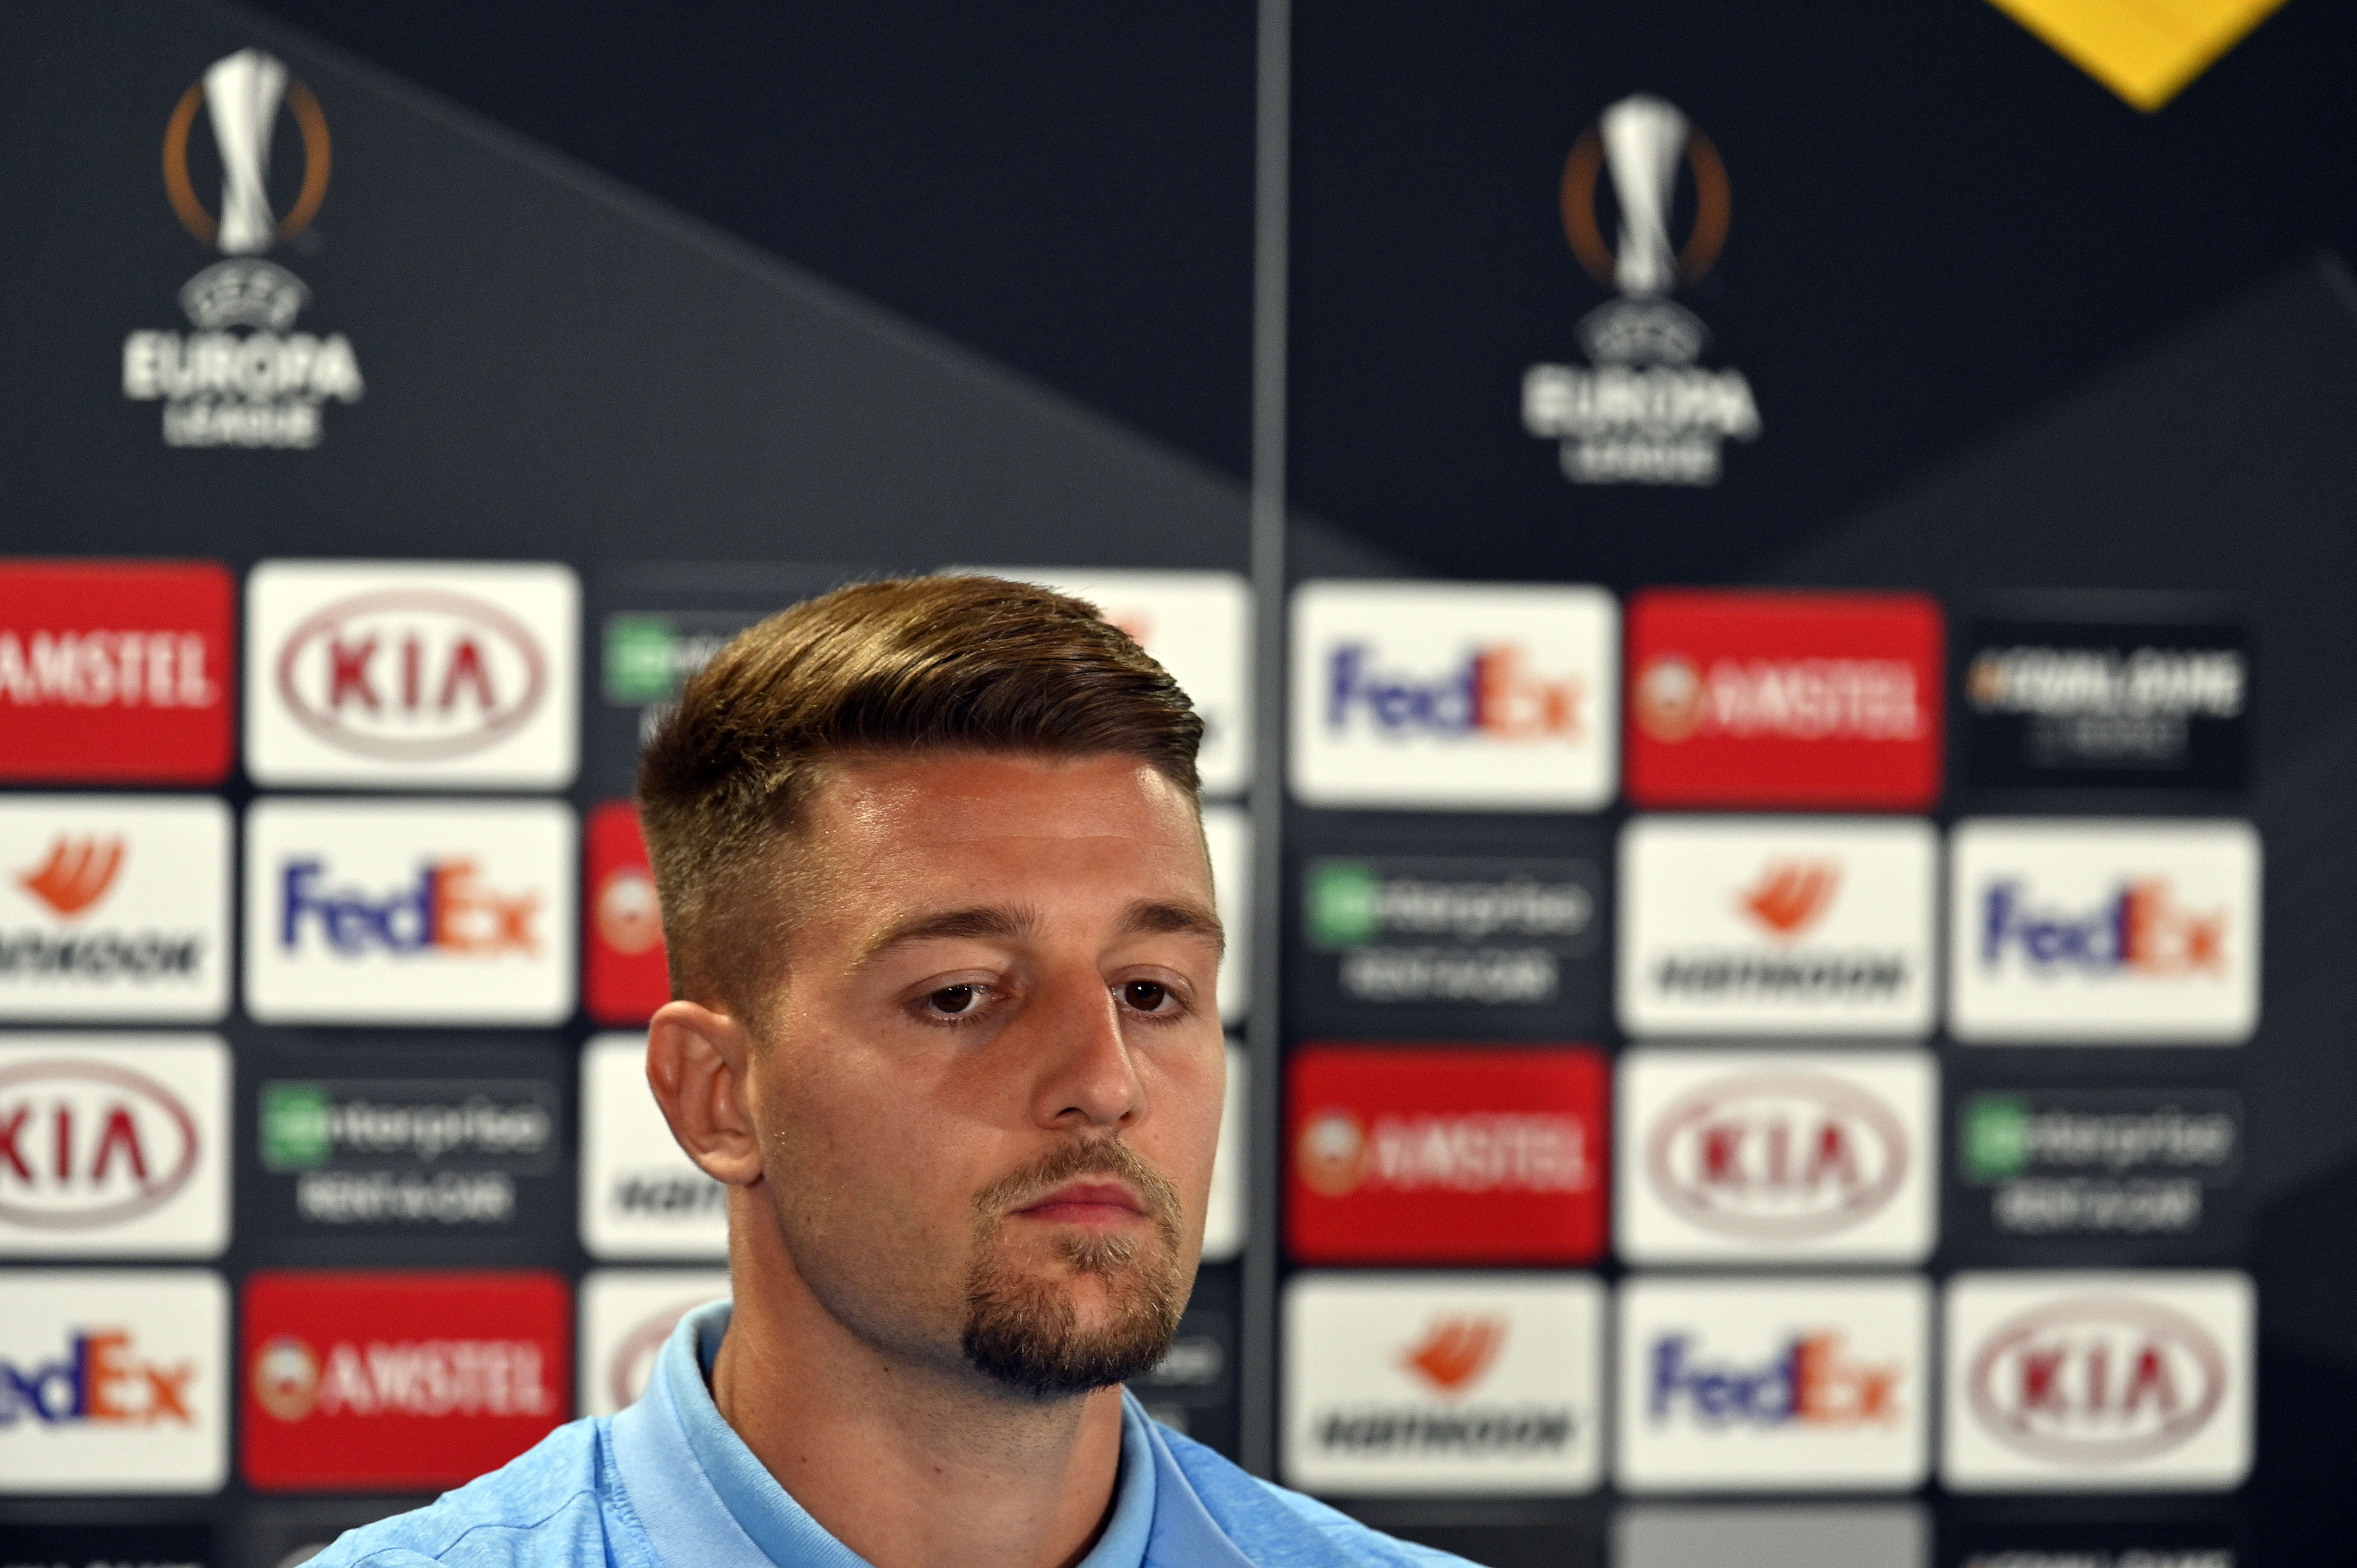 GLASGOW, SCOTLAND - OCTOBER 23:  Sergej Milinkovic Savic of SS Lazio during the SS Lazio press conference at the Celtic Park stadium on October 23, 2019 in Glasgow, Scotland.  (Photo by Marco Rosi/Getty Images)